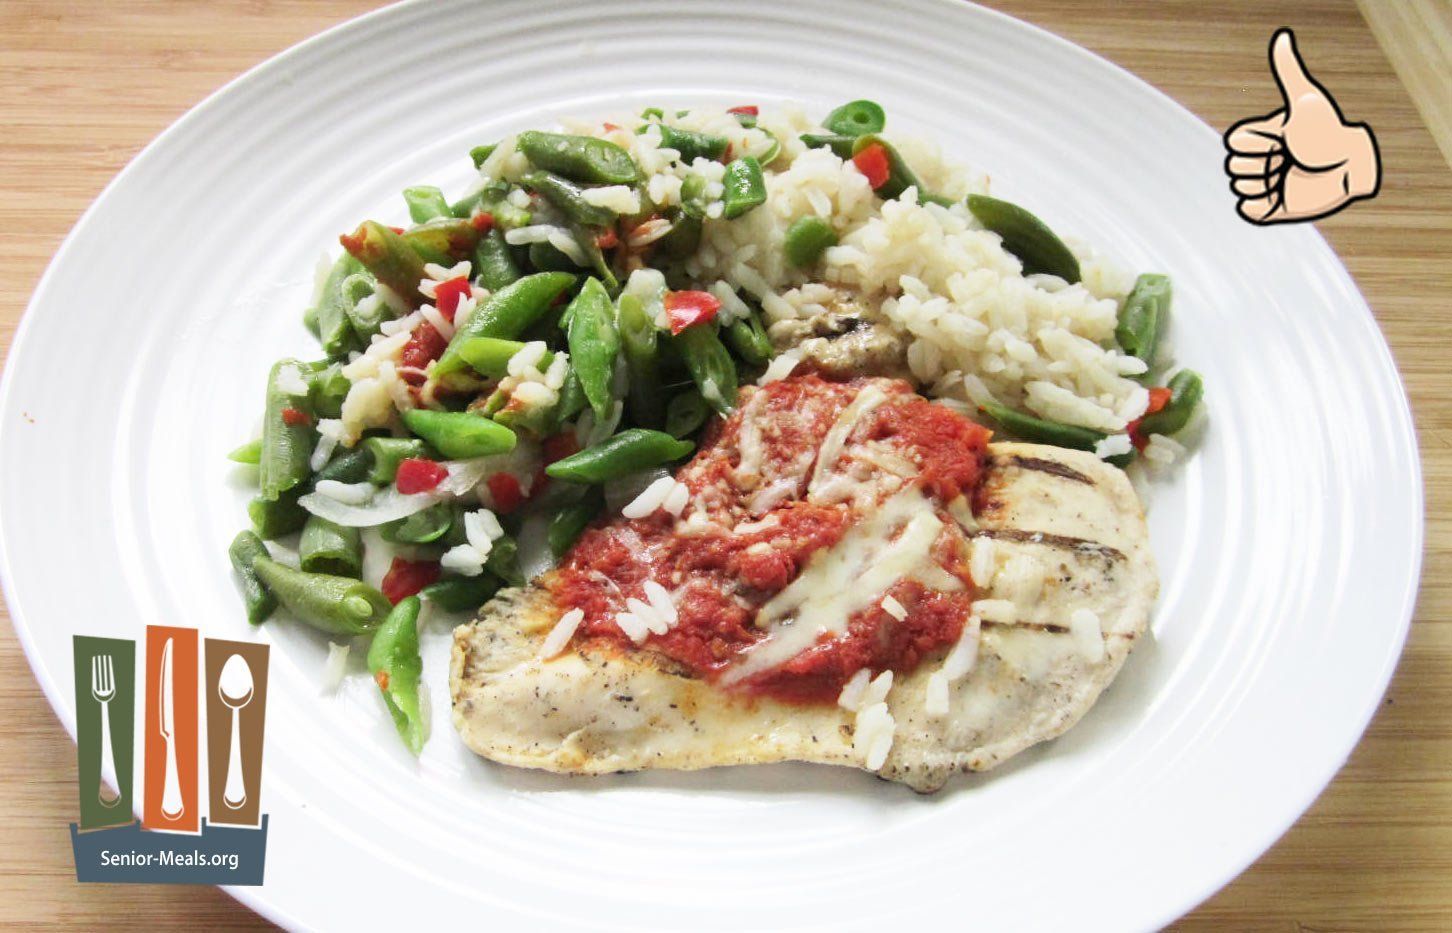 Cheesy Italian Chicken Breast Dinner - It's not Cheesy, and We Hate that the Side Rice and Vegetables are all Blended Together because of Single Compartment Meals, but this was Okay.